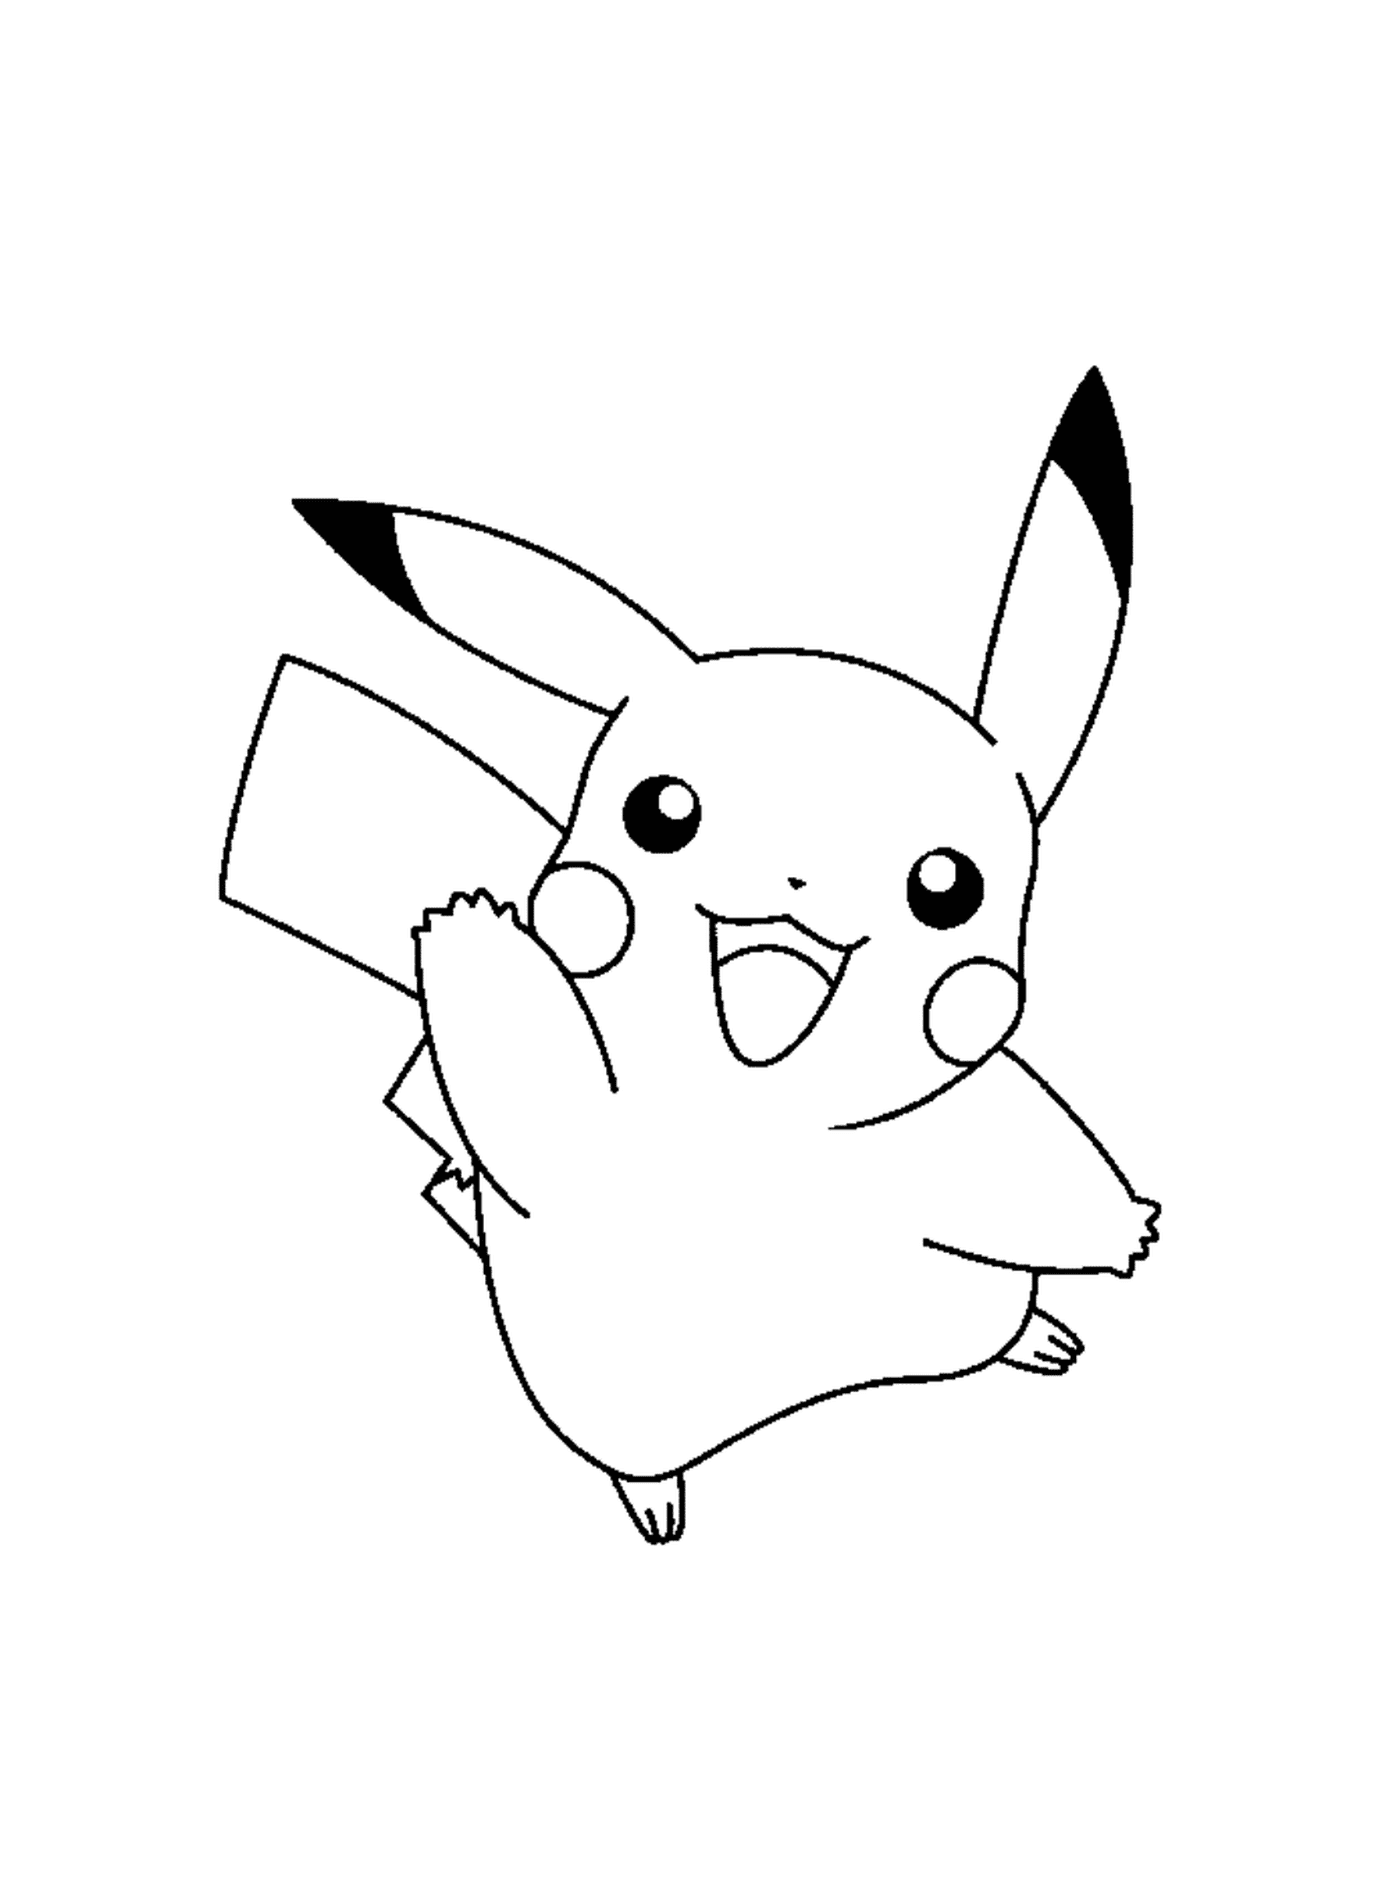  Happy and energetic Pikachu 